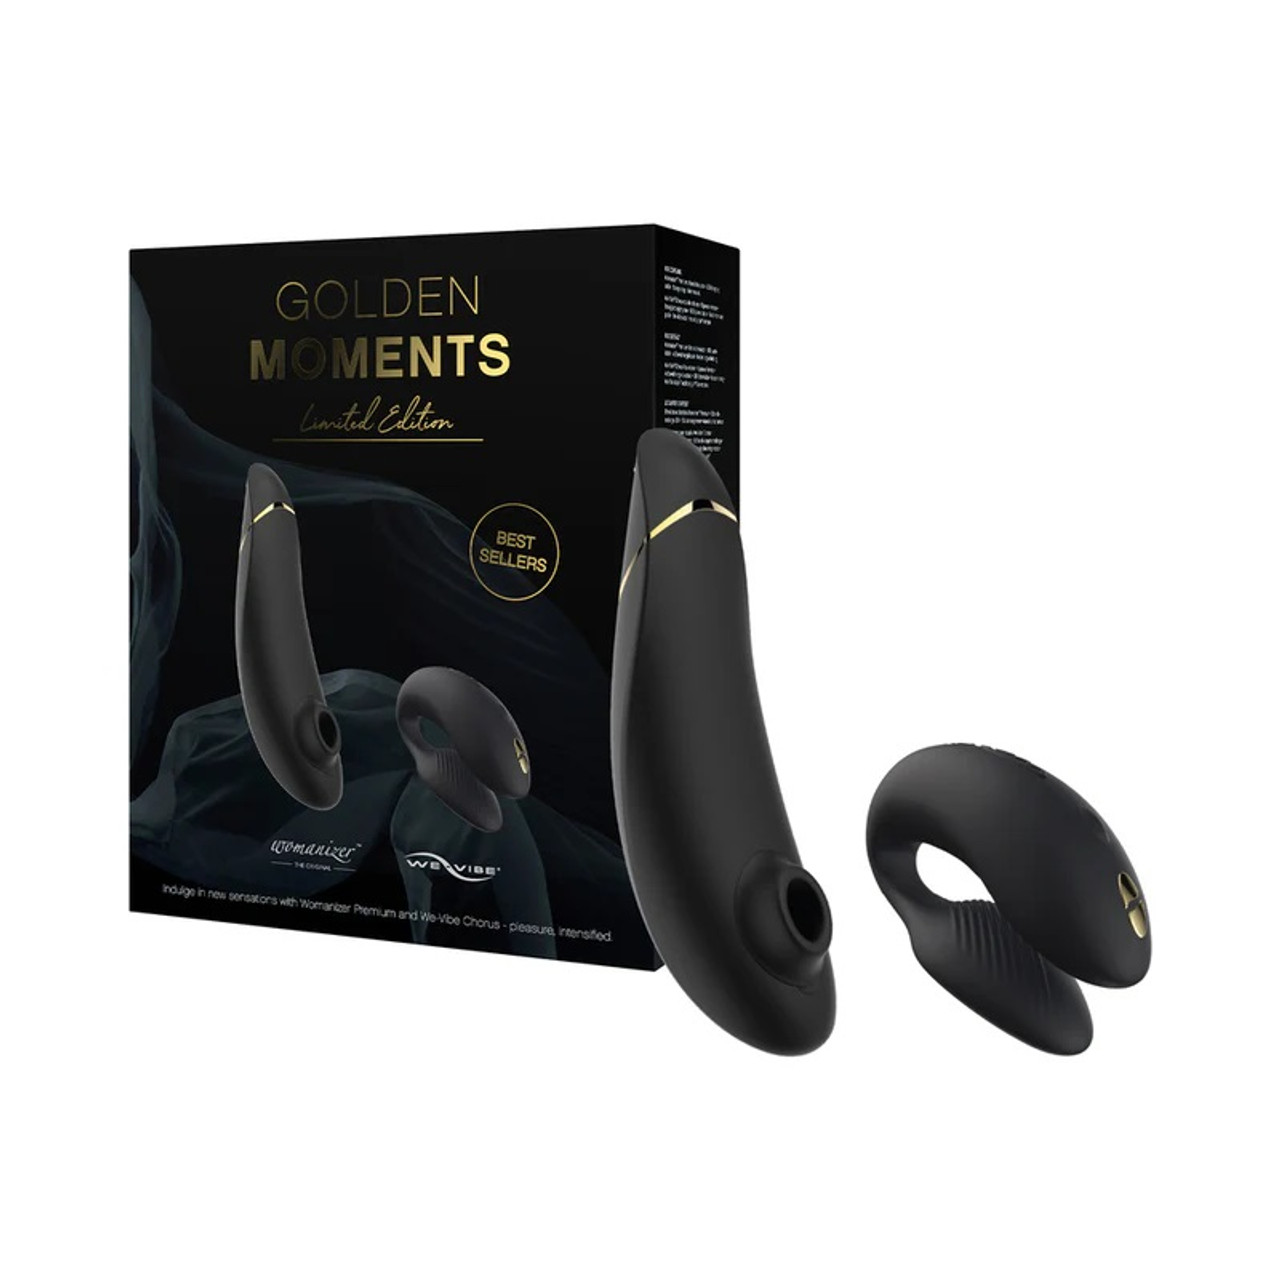 Golden Moments Limited Edition Couples Kit